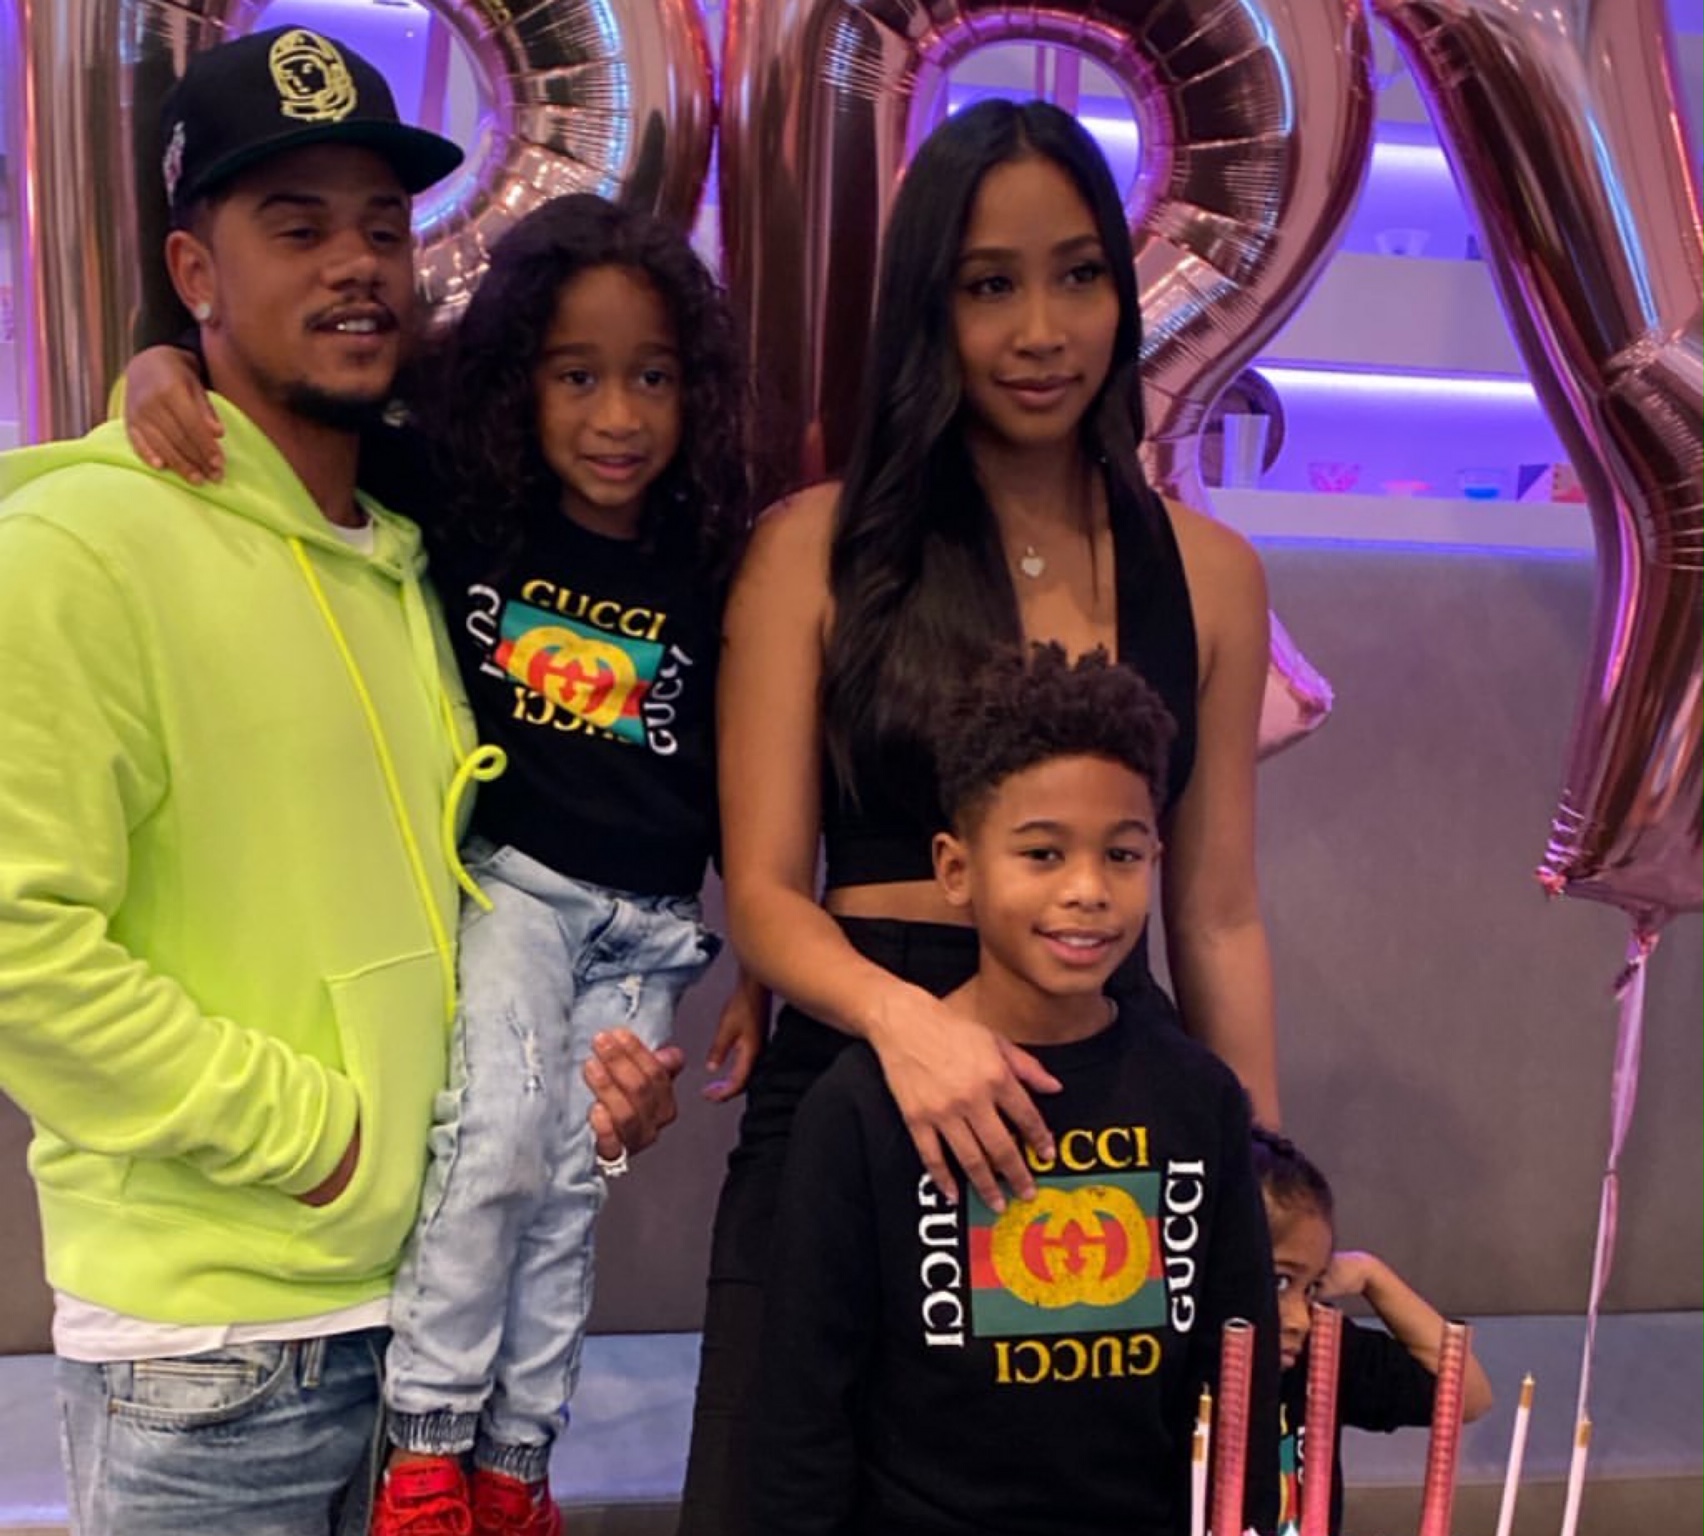 LIL Fizz throws apryl jones a surprise party with help from their kids.